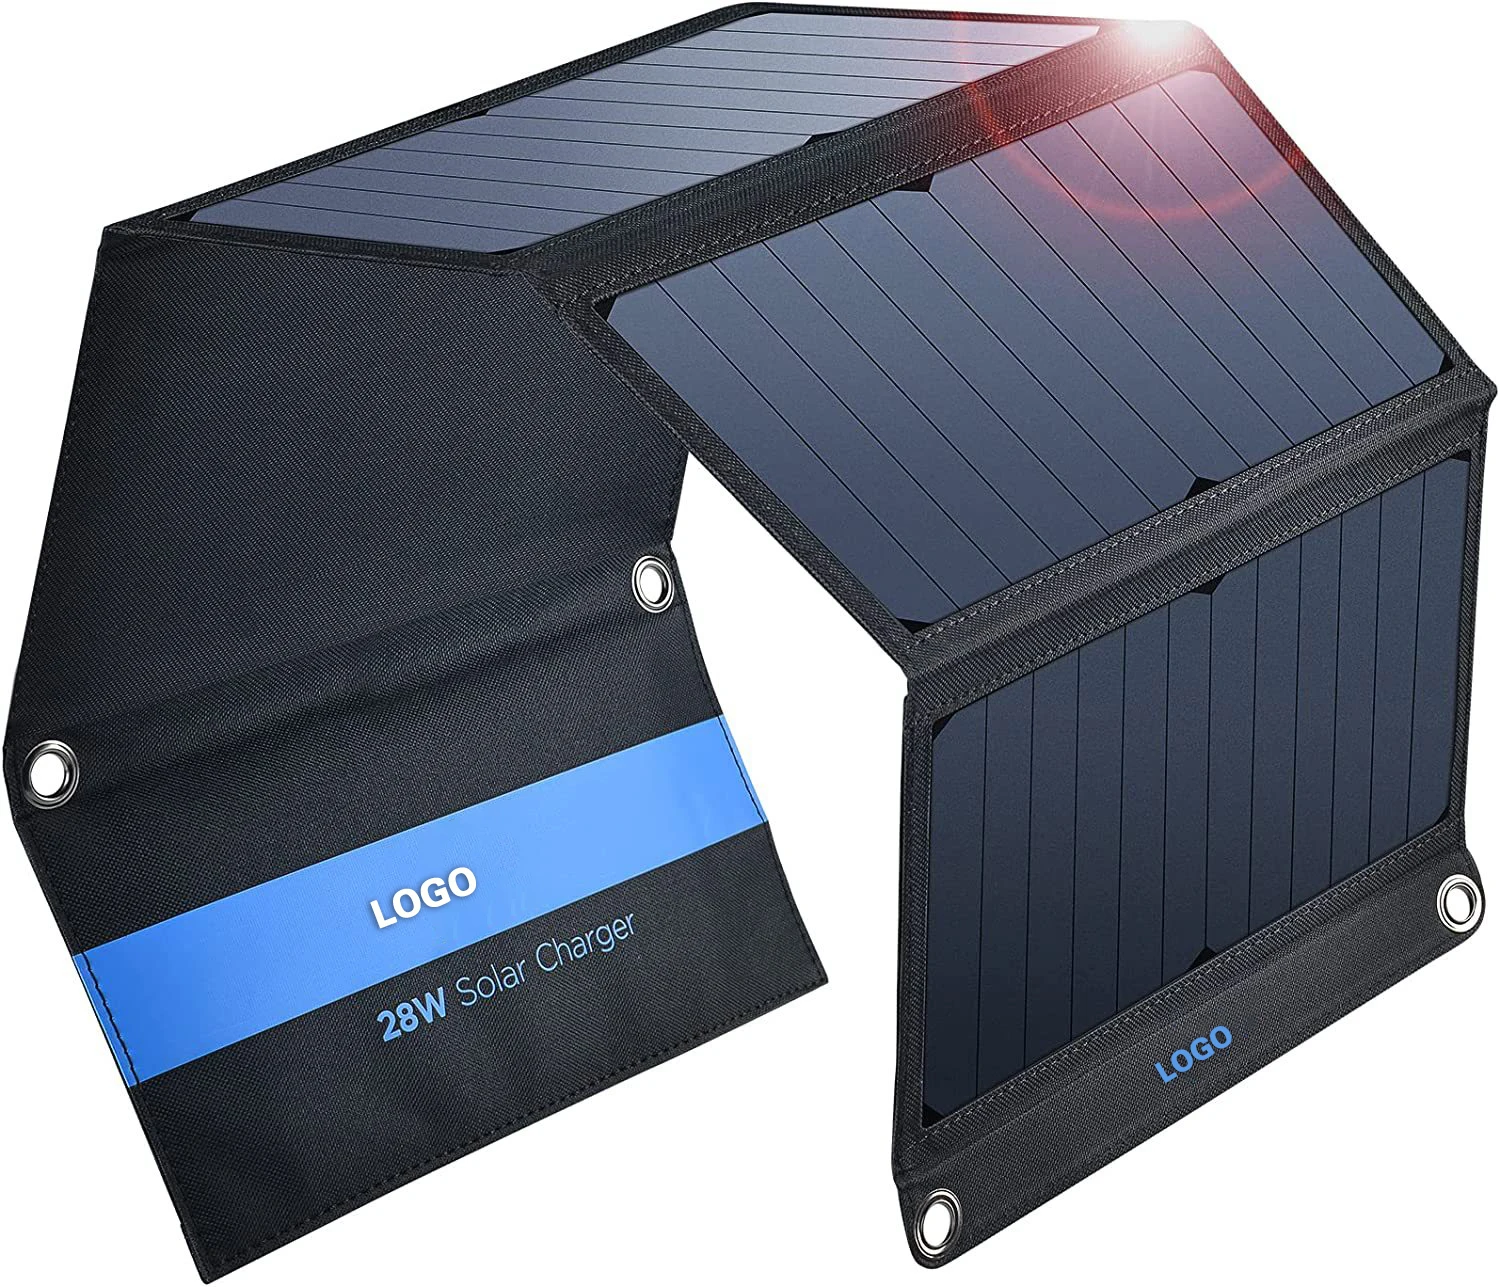 Hot Sell Portable solar panel mobile phone notebook charging outdoor travel folding bag 28W charger with good price